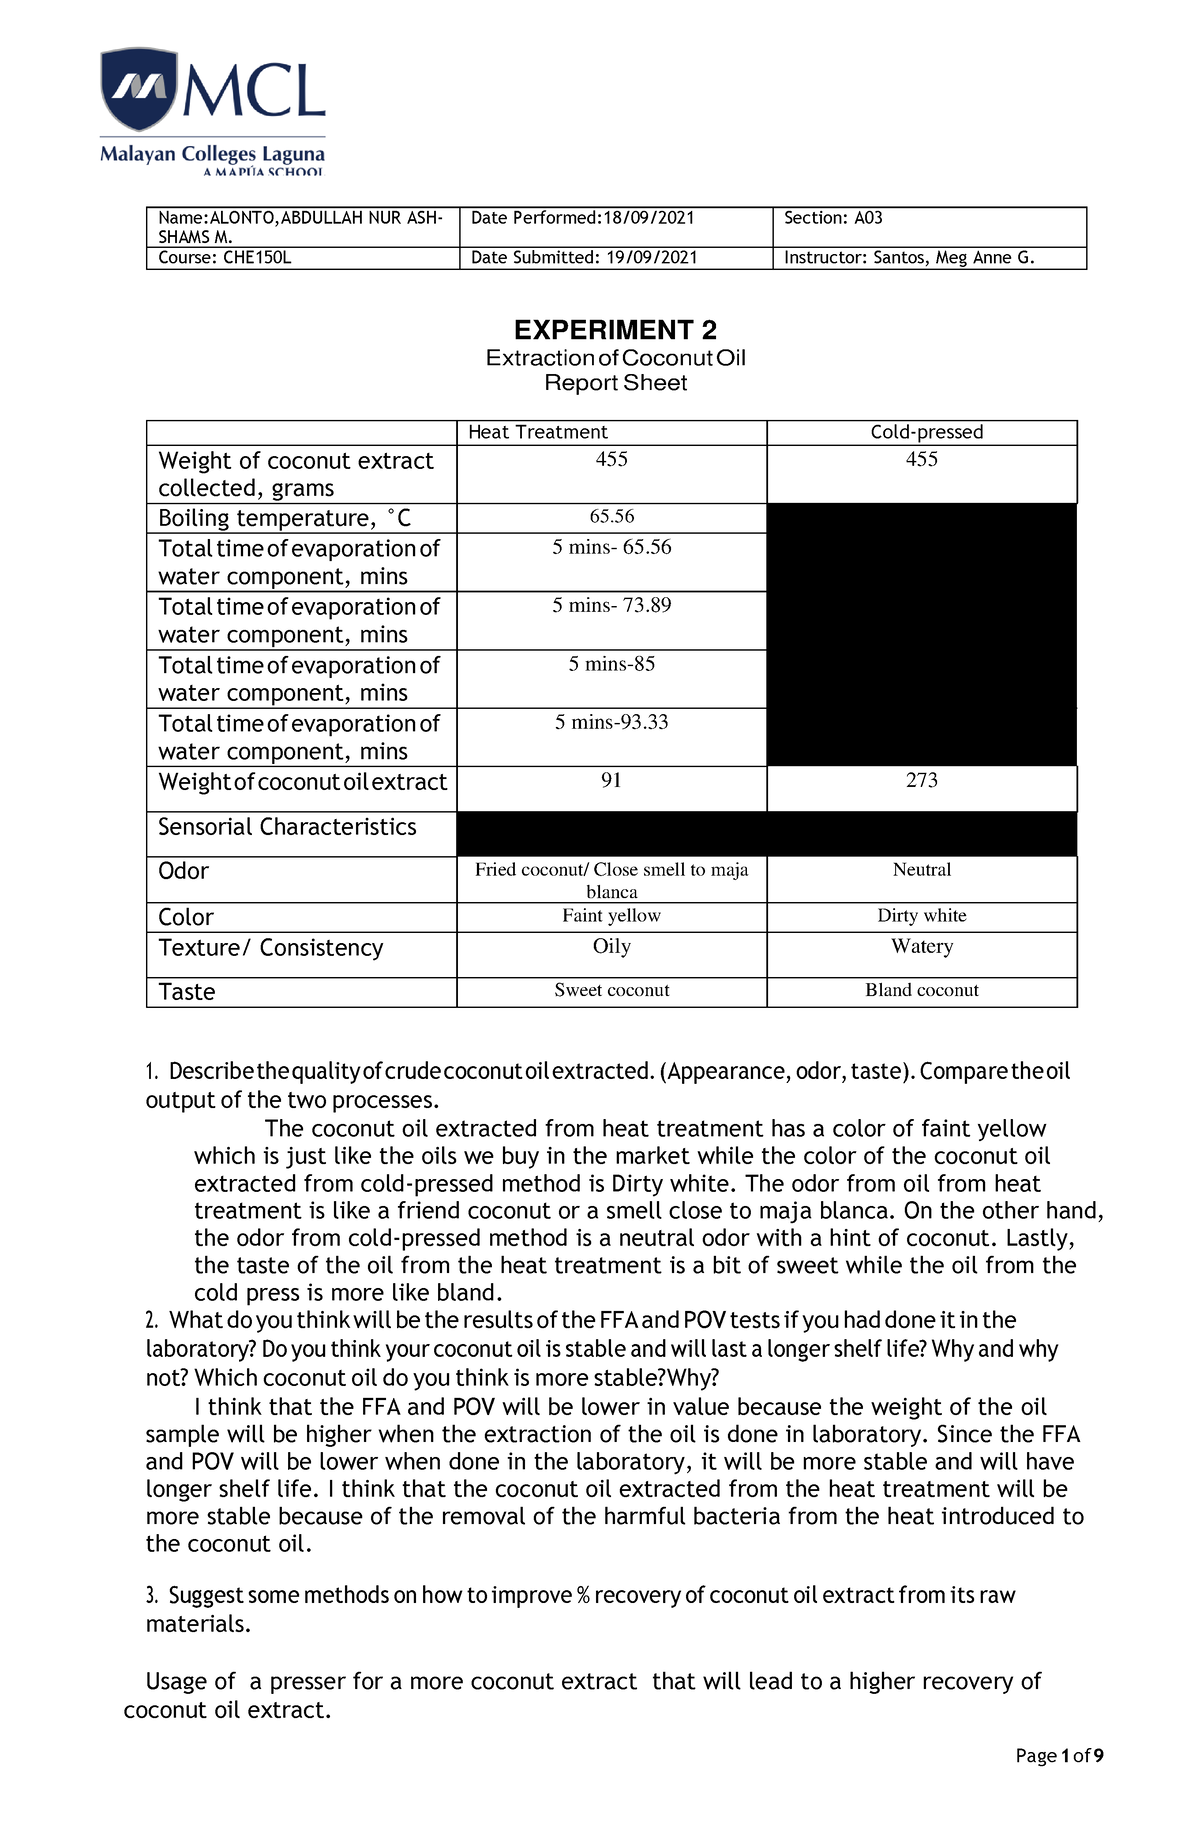 Experiment 2 extraction of coconut oil report sheet - Name:ALONTO ...